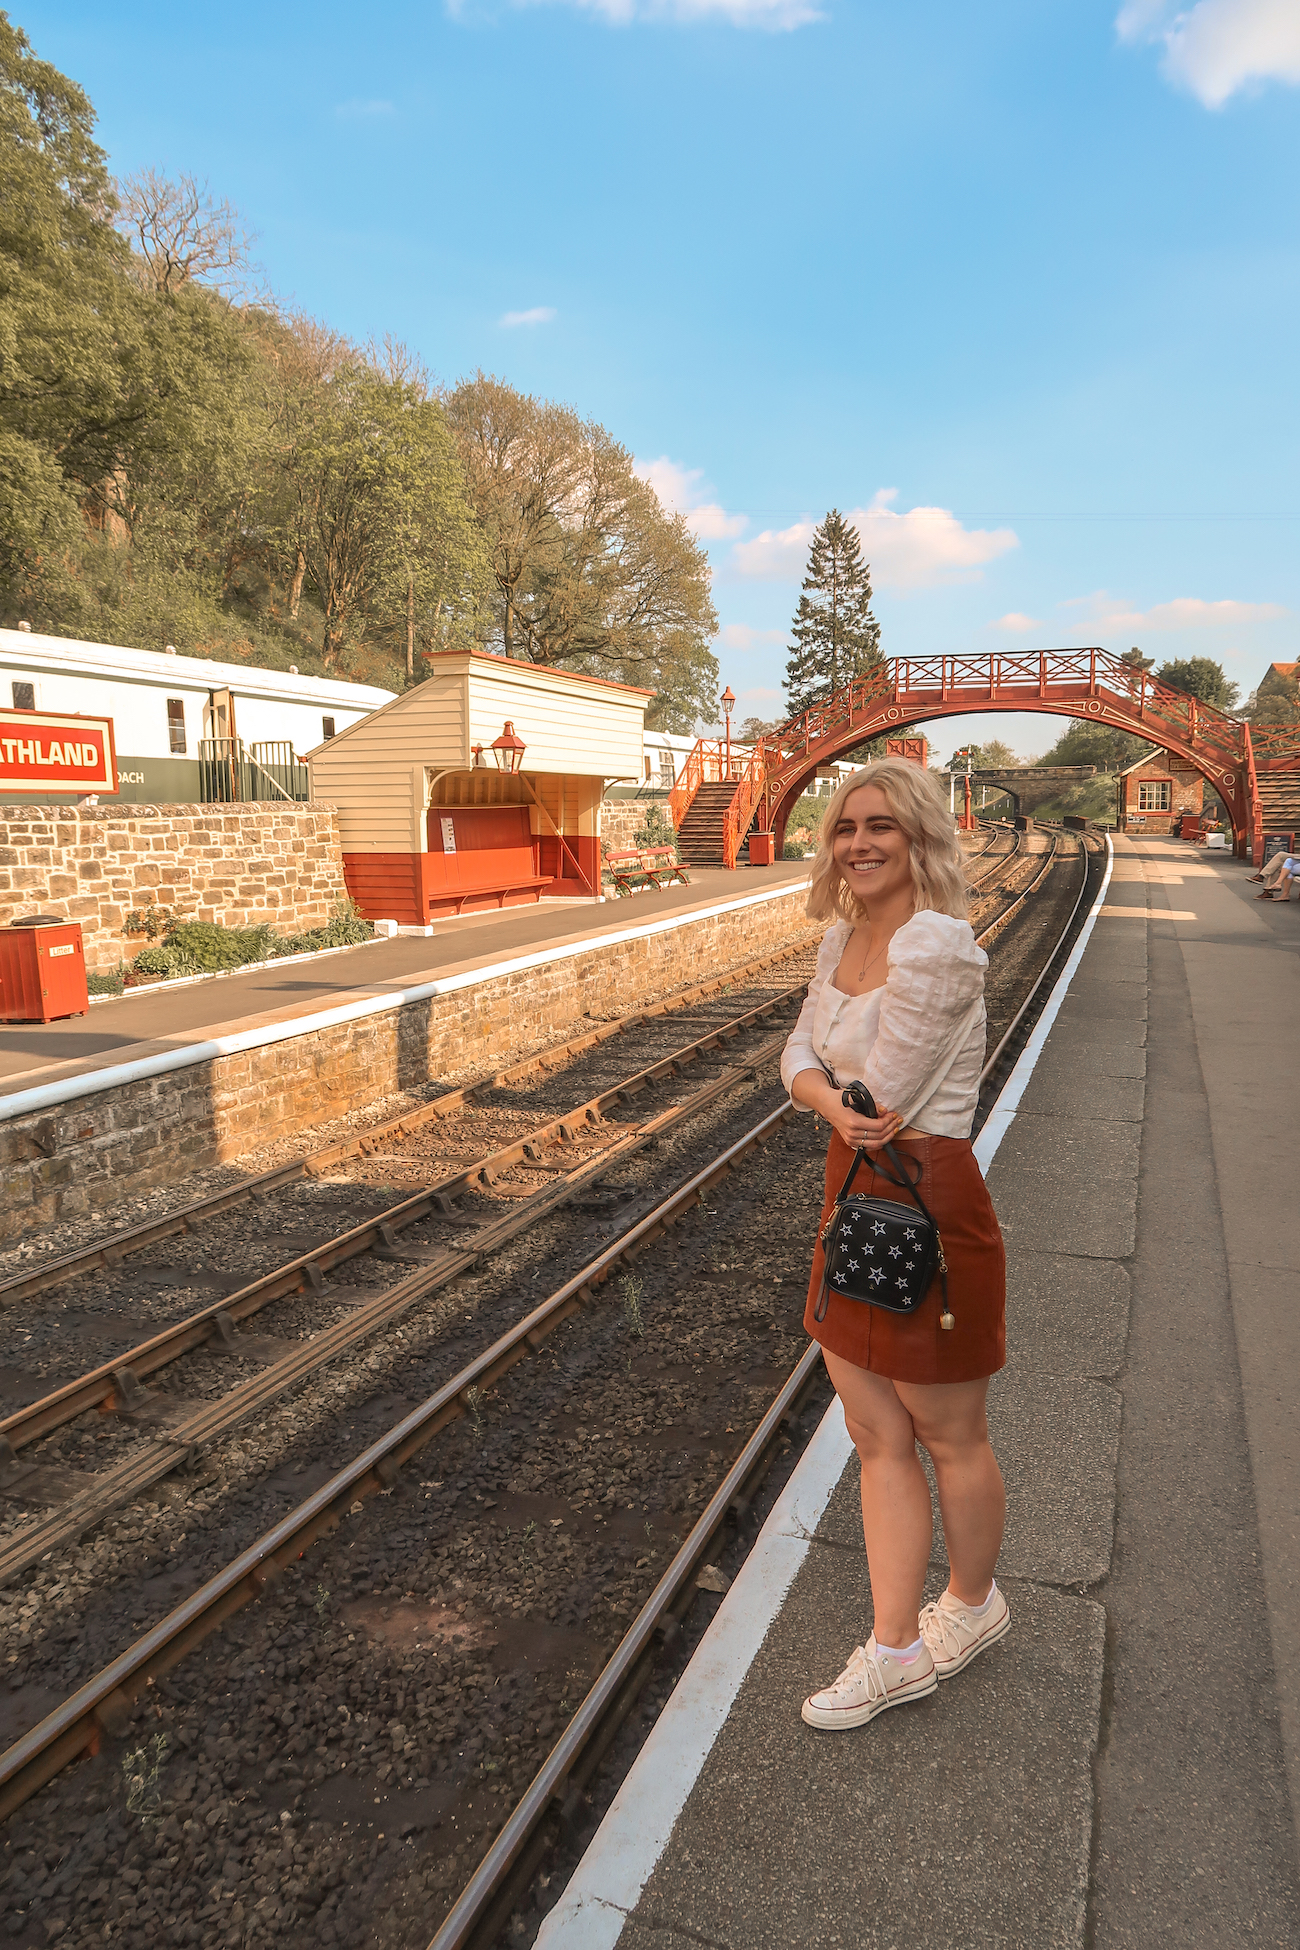 beautiful train stations in england